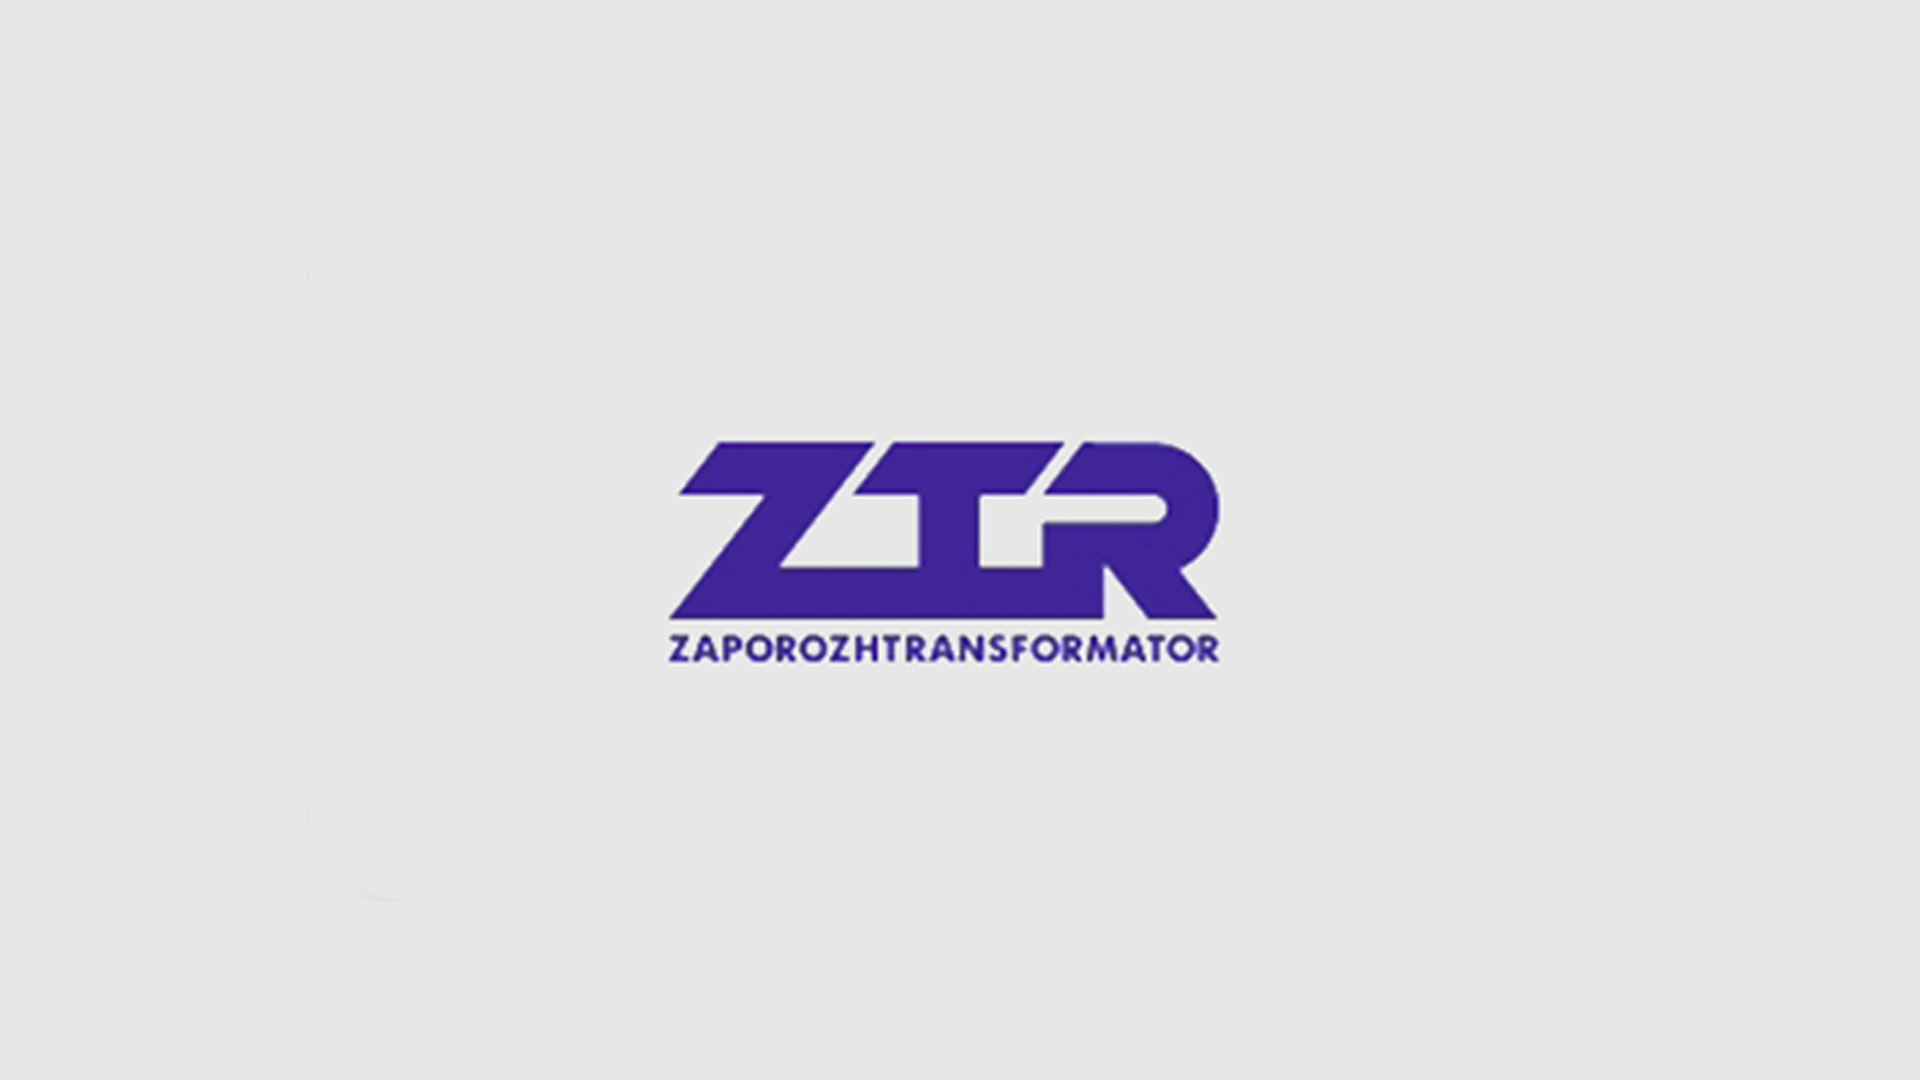 <span class="equity">EQUITY</span> advises Zaporizhtransformator in its Disputes with Anti-Trust Authorities